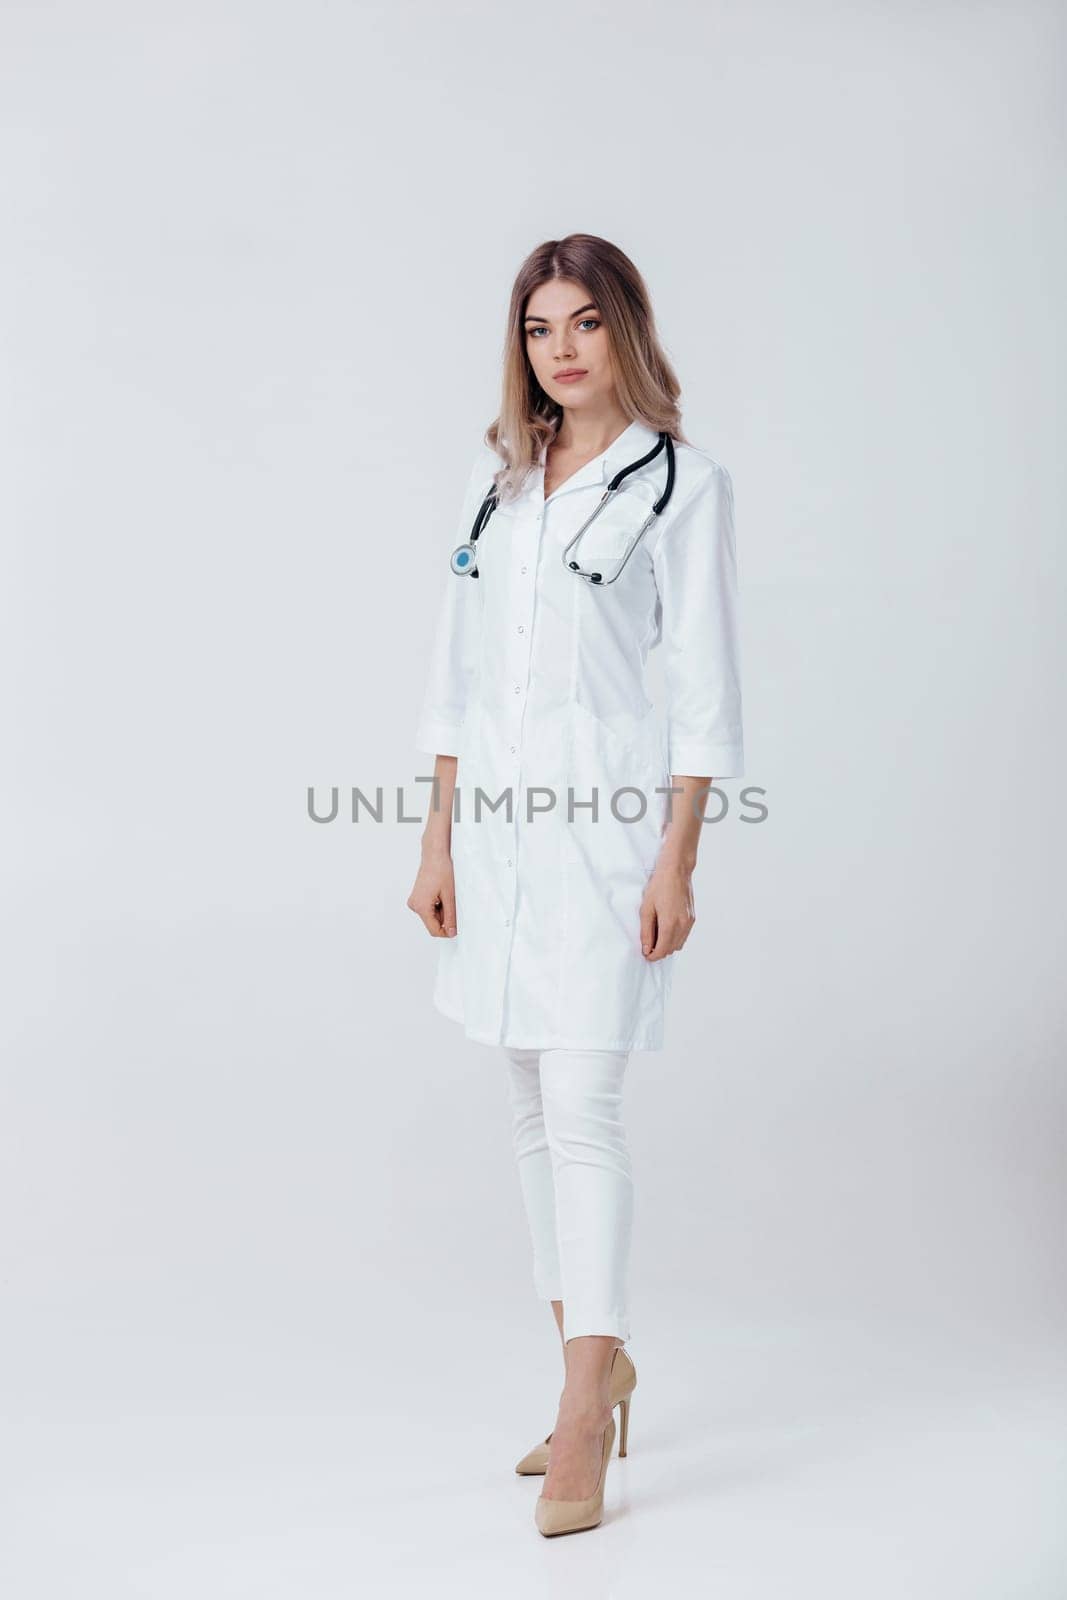 doctor woman in white coat with stethoscope by erstudio